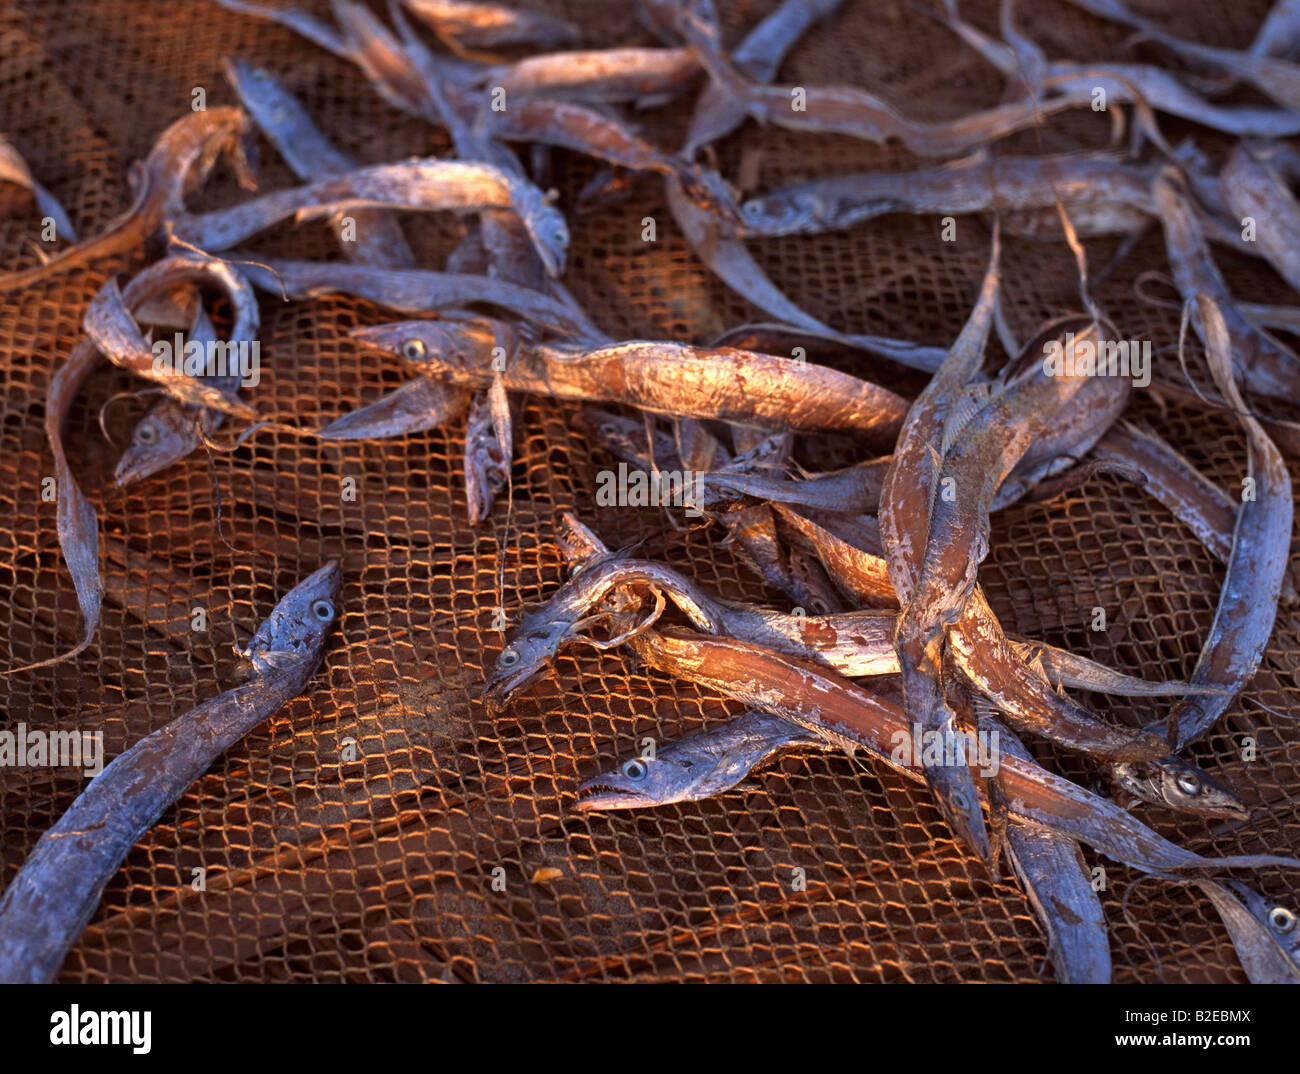 High angle view of dried fish on sack Stock Photo